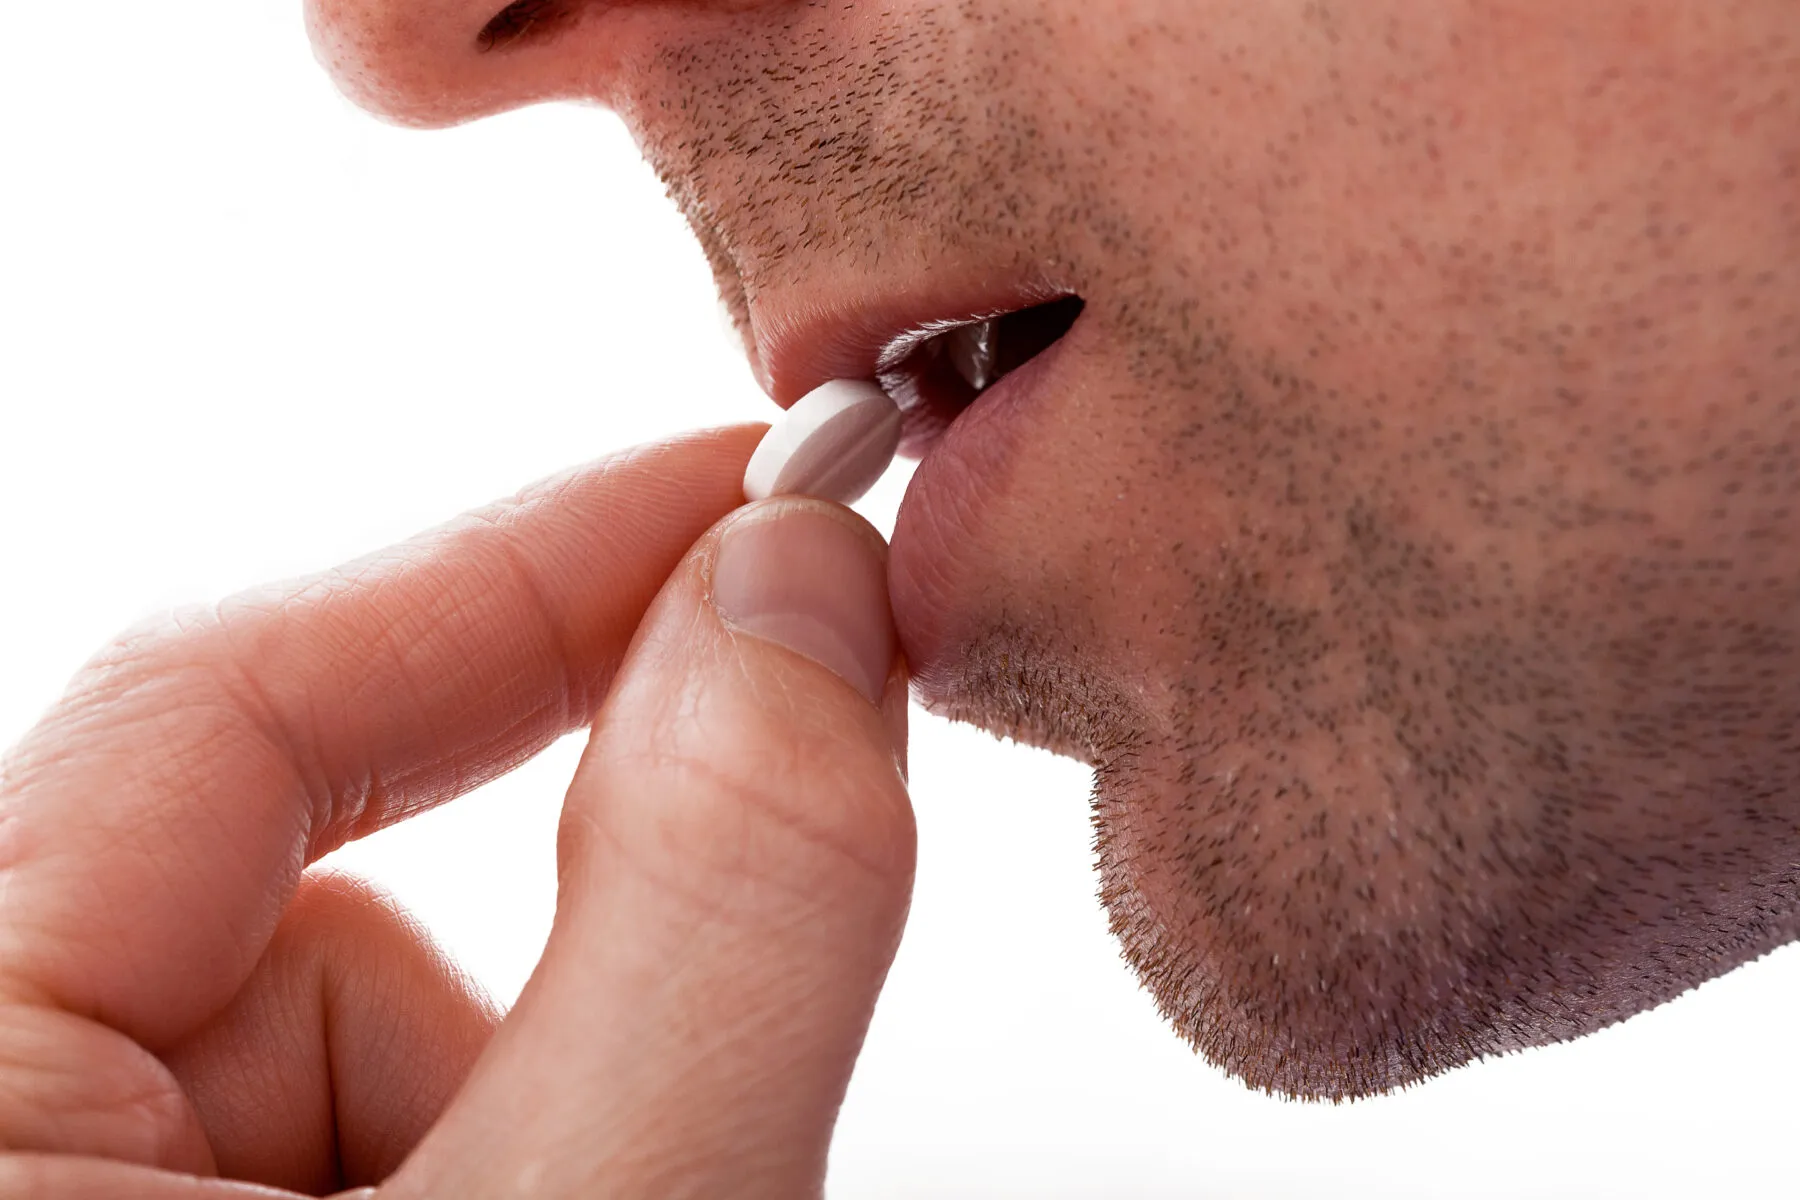 A close up of a man putting a pill into his mouth